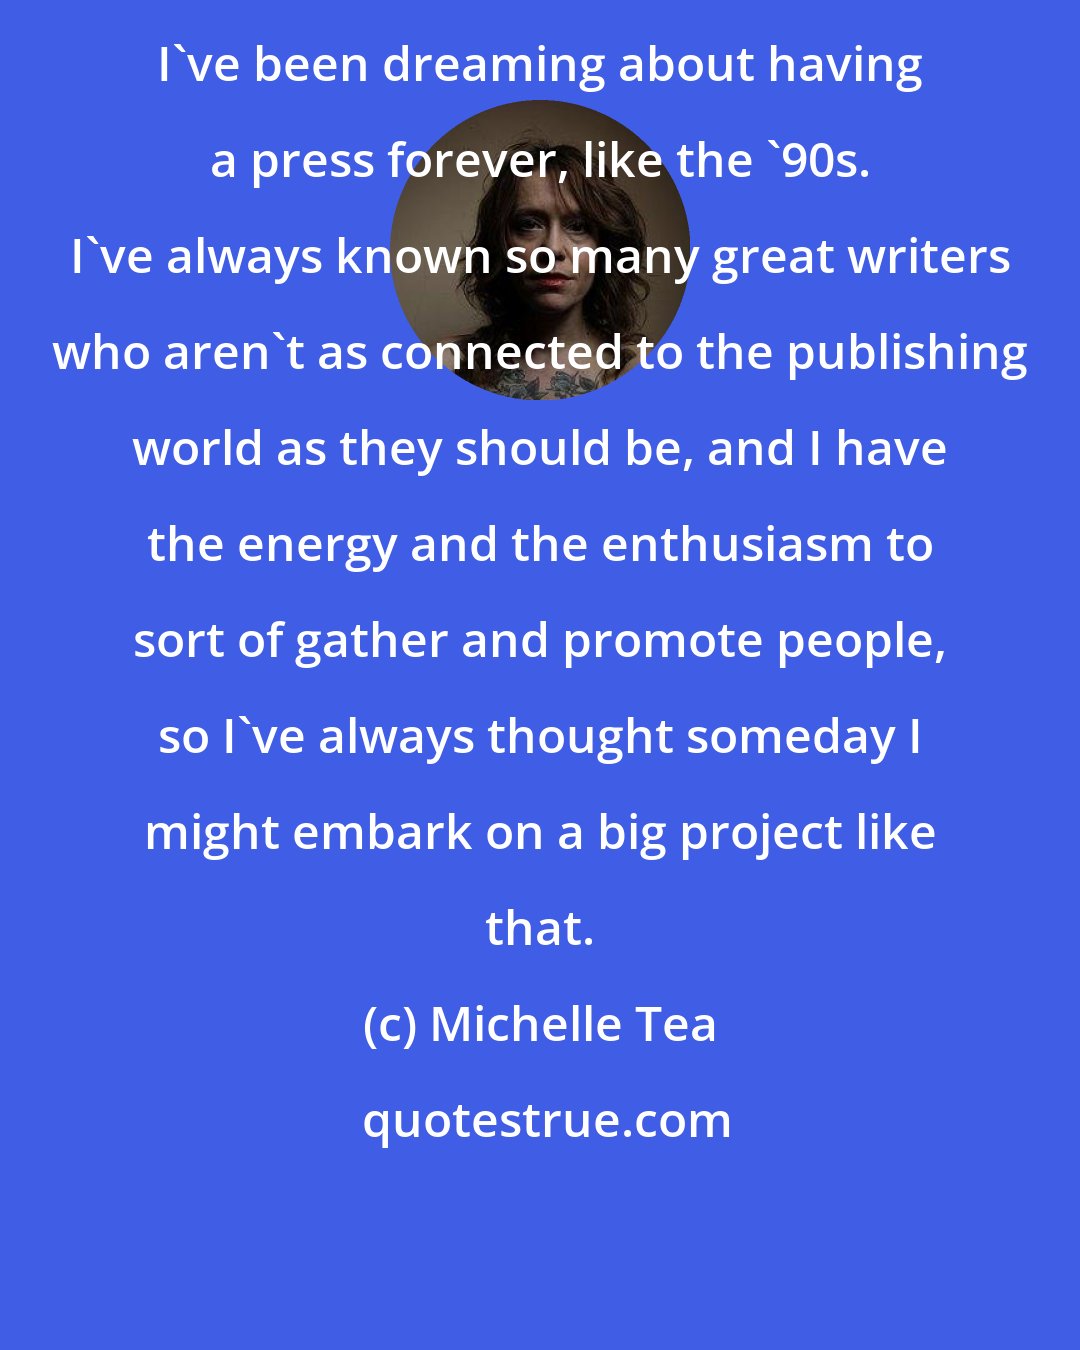 Michelle Tea: I've been dreaming about having a press forever, like the '90s. I've always known so many great writers who aren't as connected to the publishing world as they should be, and I have the energy and the enthusiasm to sort of gather and promote people, so I've always thought someday I might embark on a big project like that.